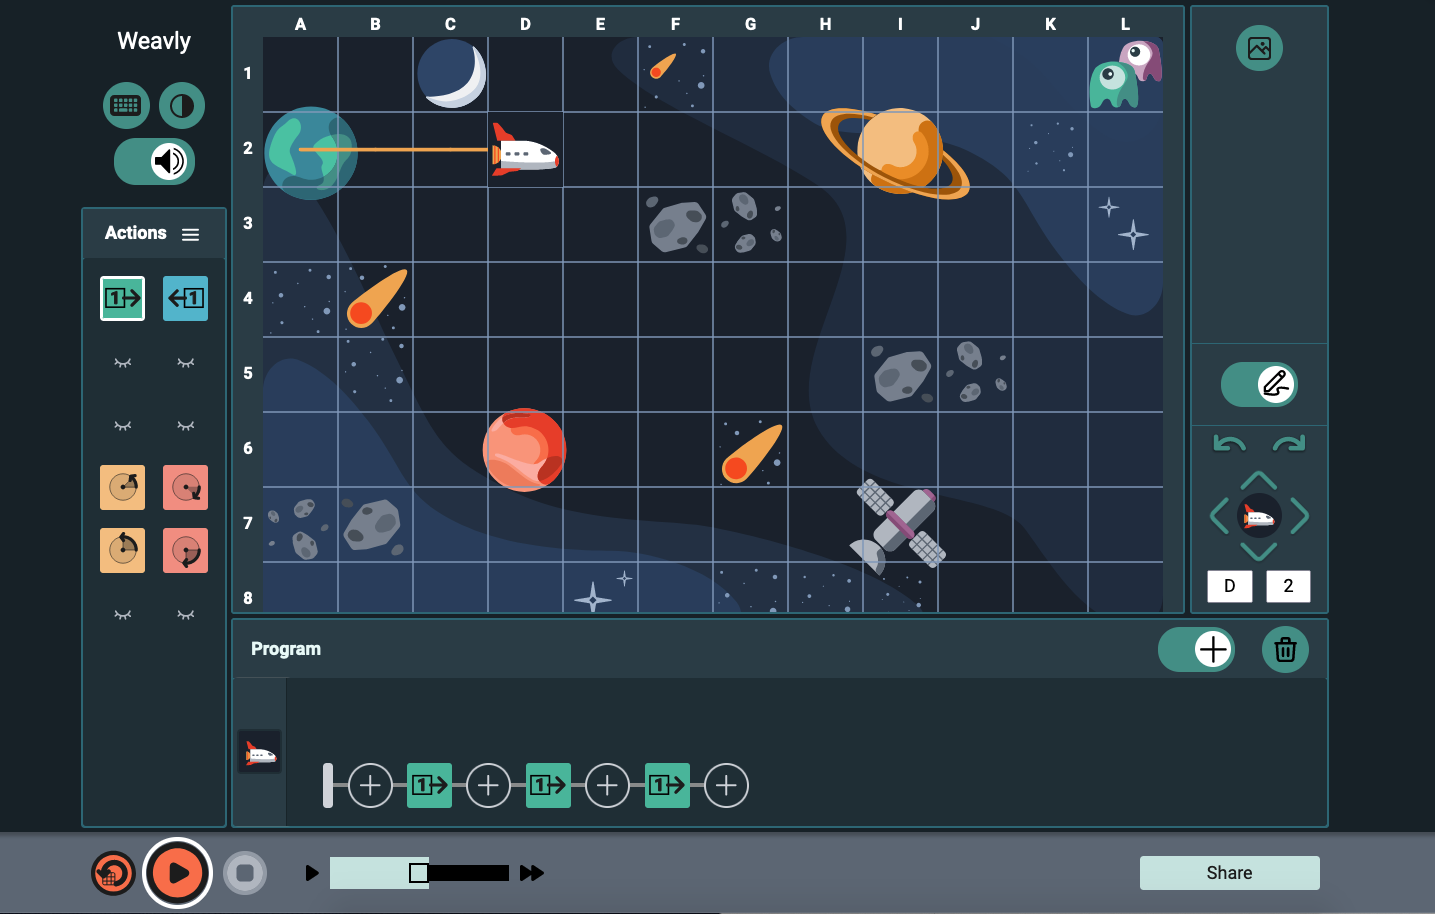 Weavly coding environemnt with the space background